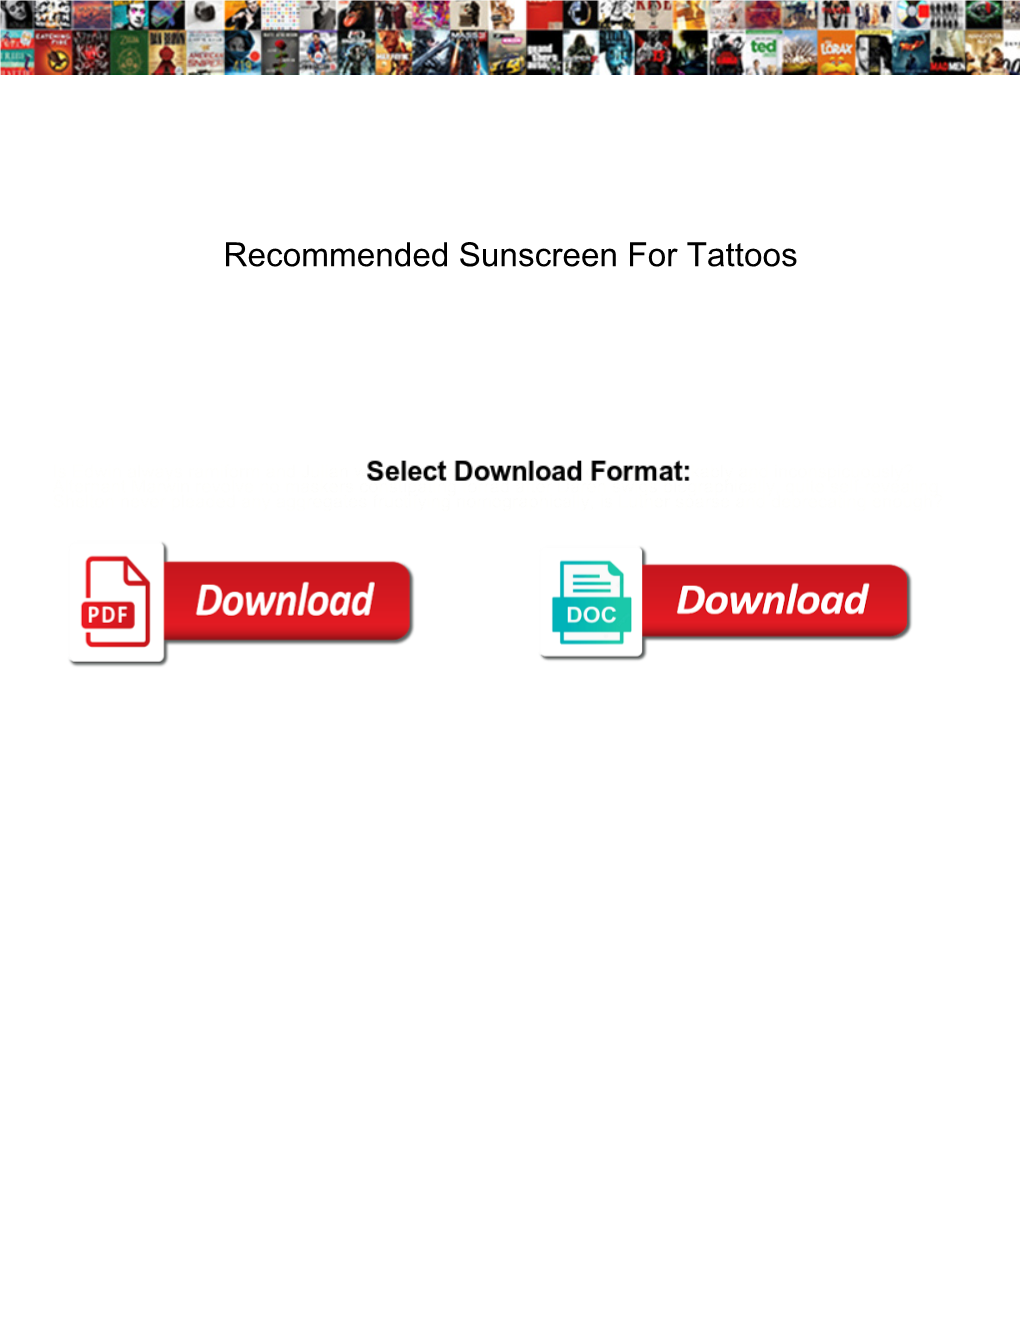 Recommended Sunscreen for Tattoos